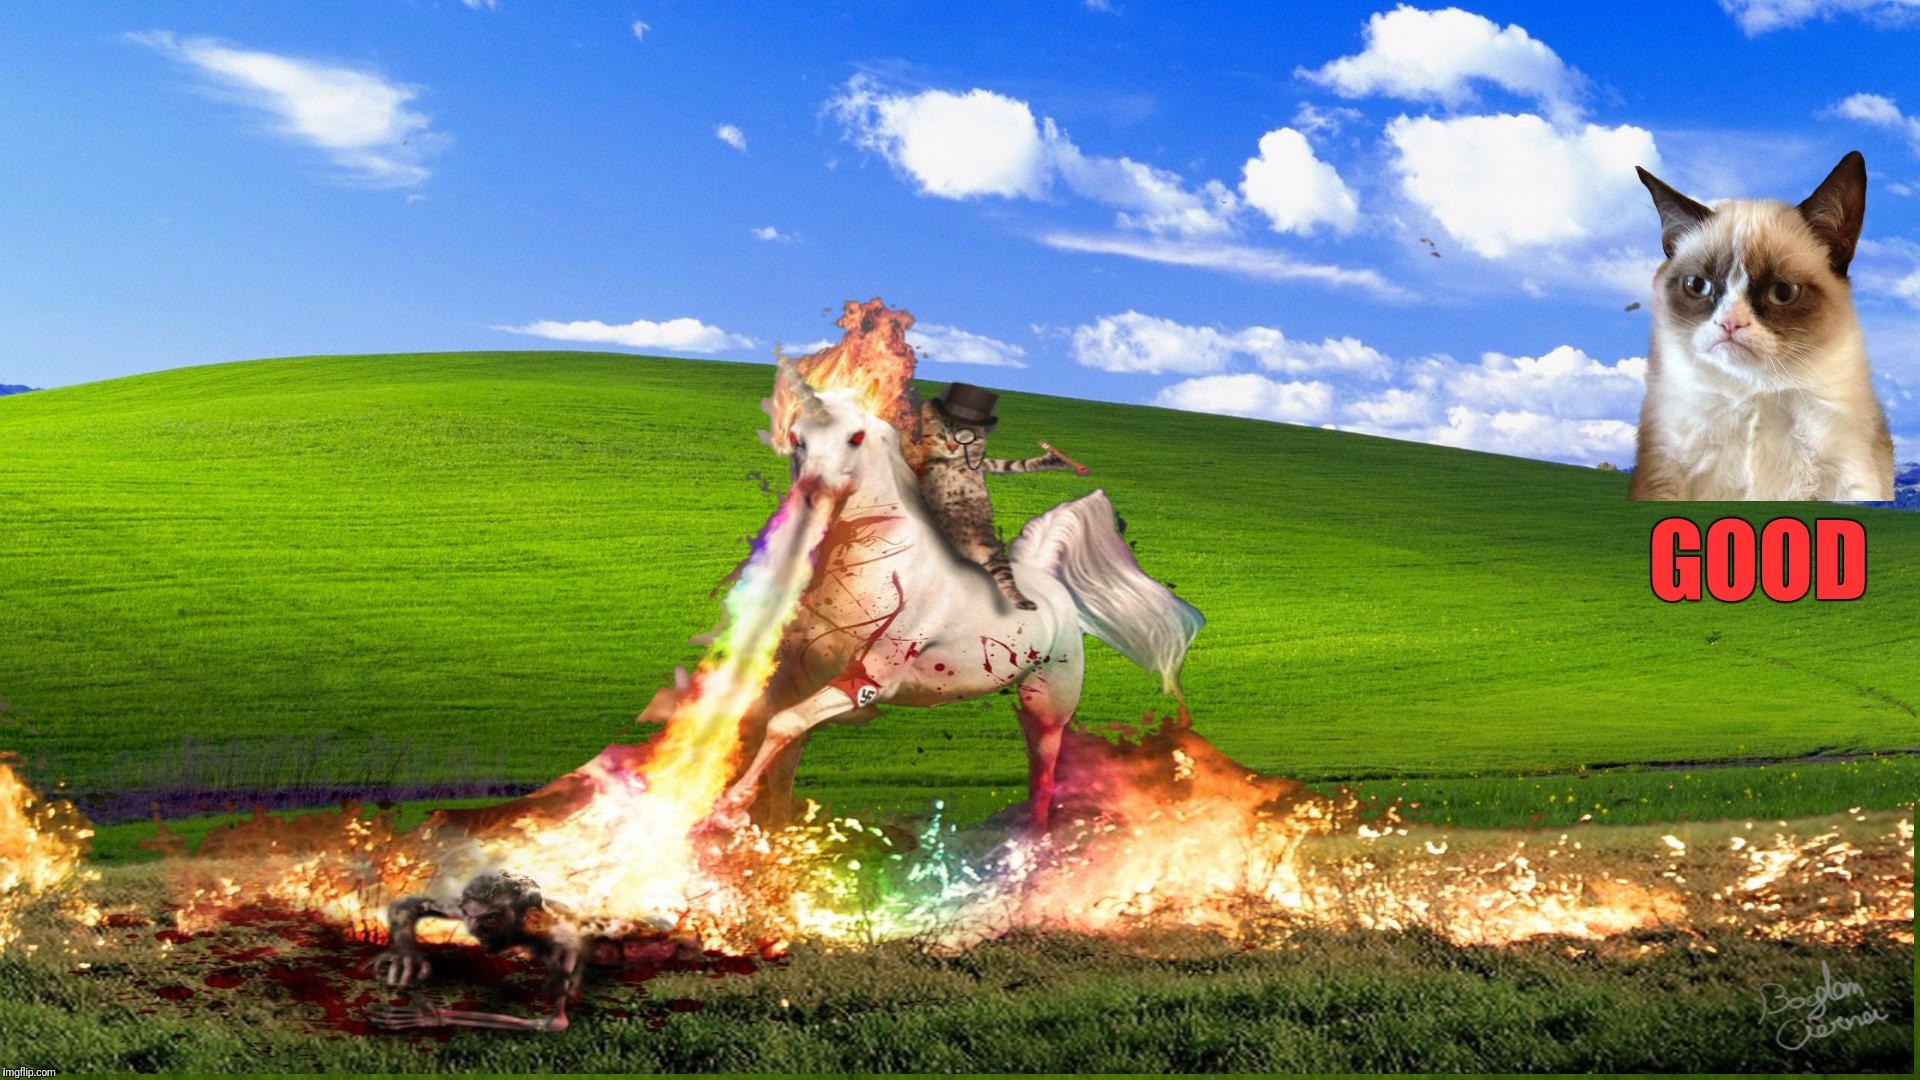 1920x1080 Microsoft has hired Grumpy Cat and his team to retire all remaining XP users